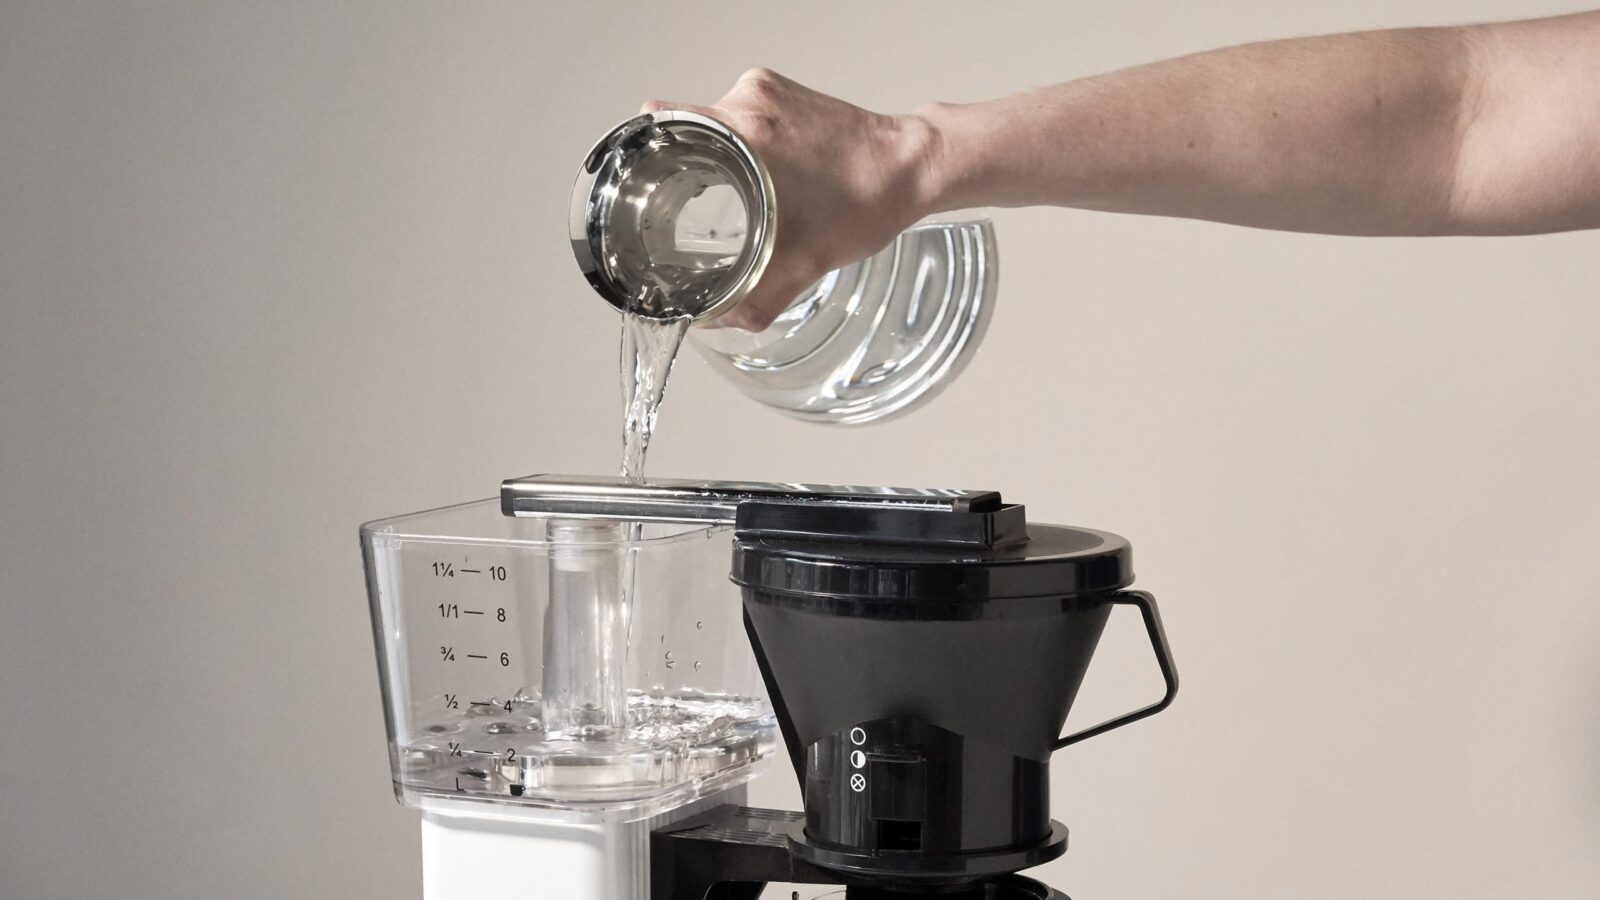 01 TRD20 Coffee Maker Water scaled - Recycled Bags